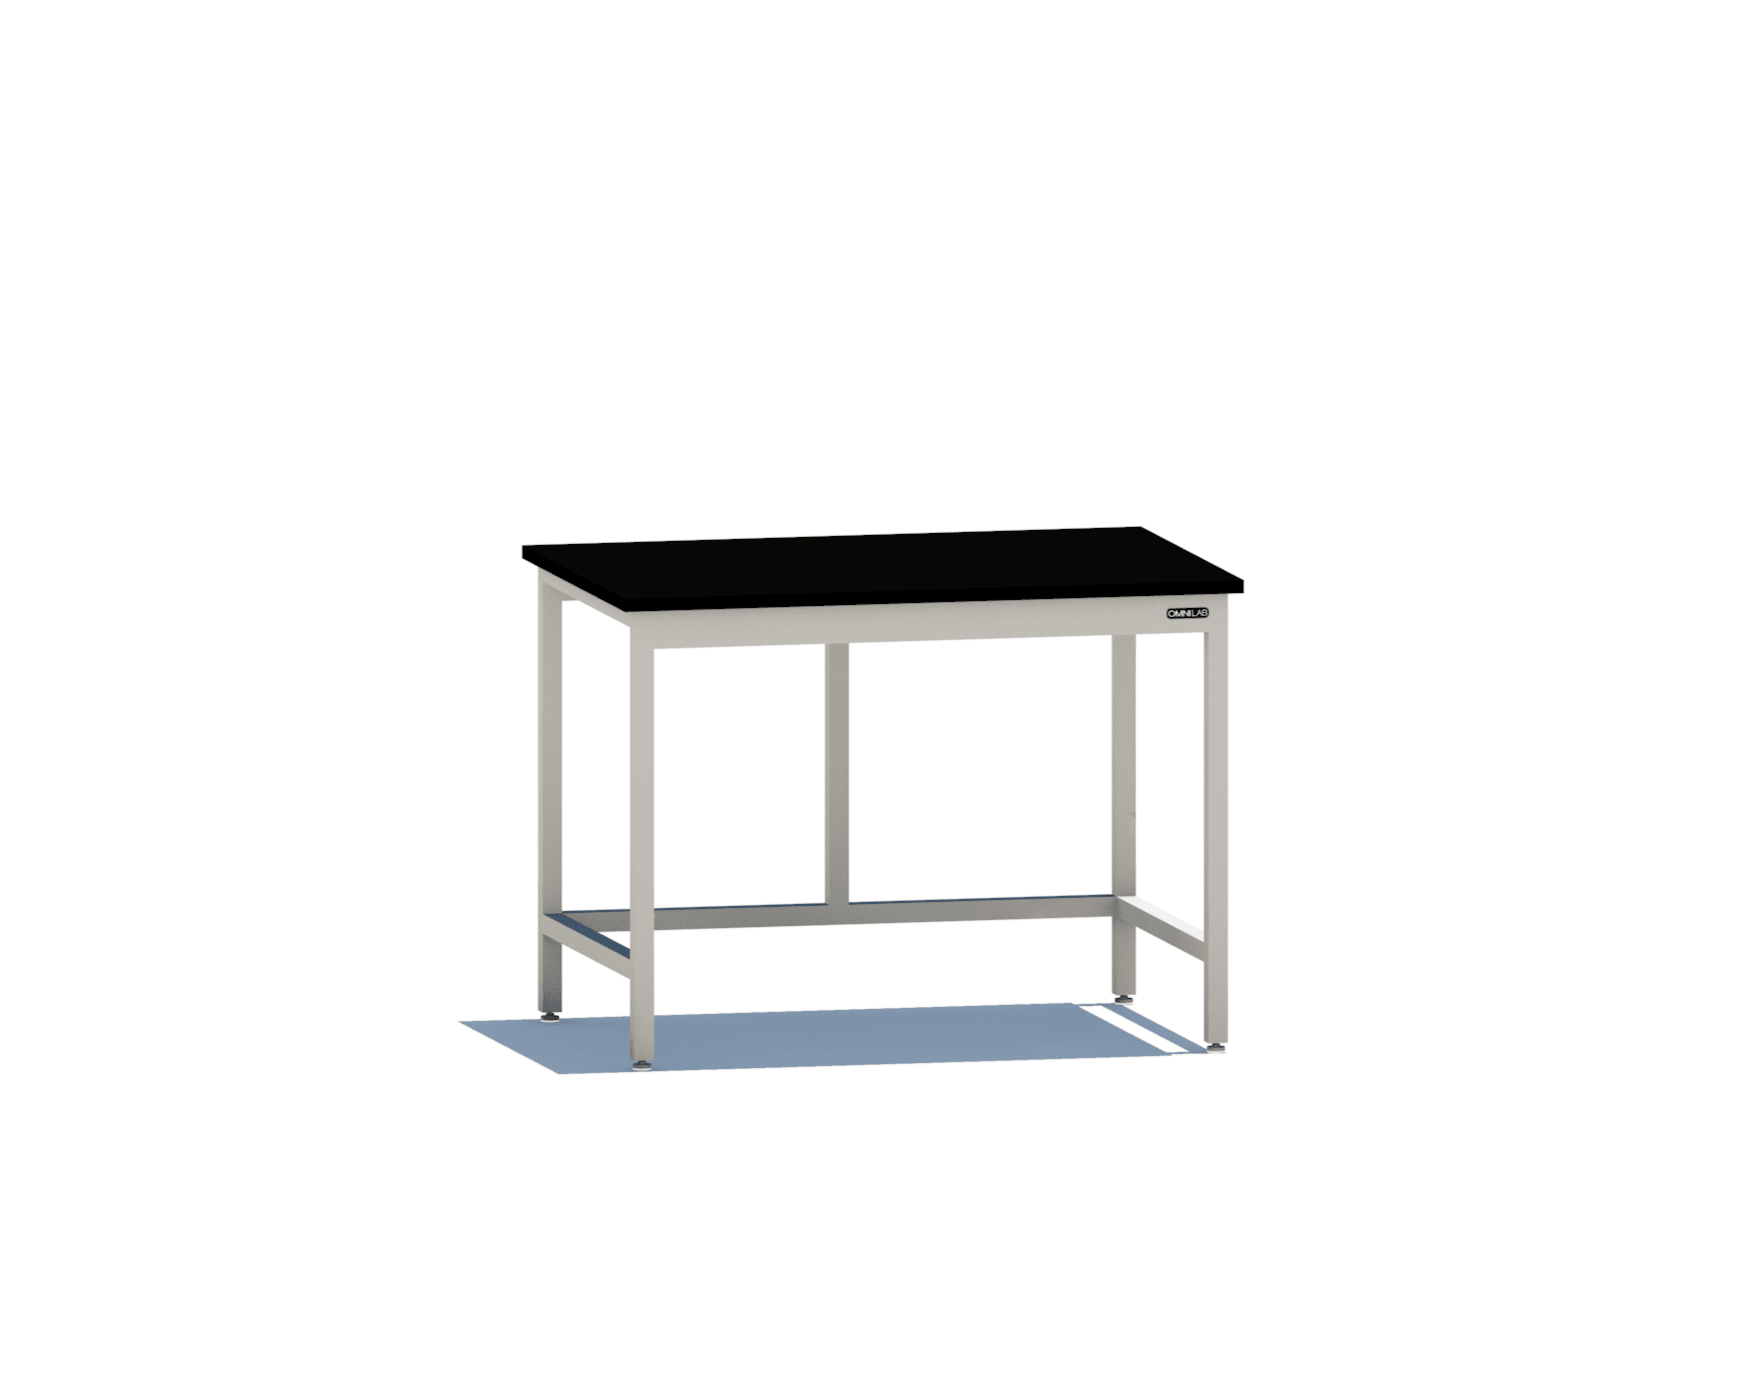 Essential Table 1 Lab Tables OMNI Lab Solutions 48" wide 